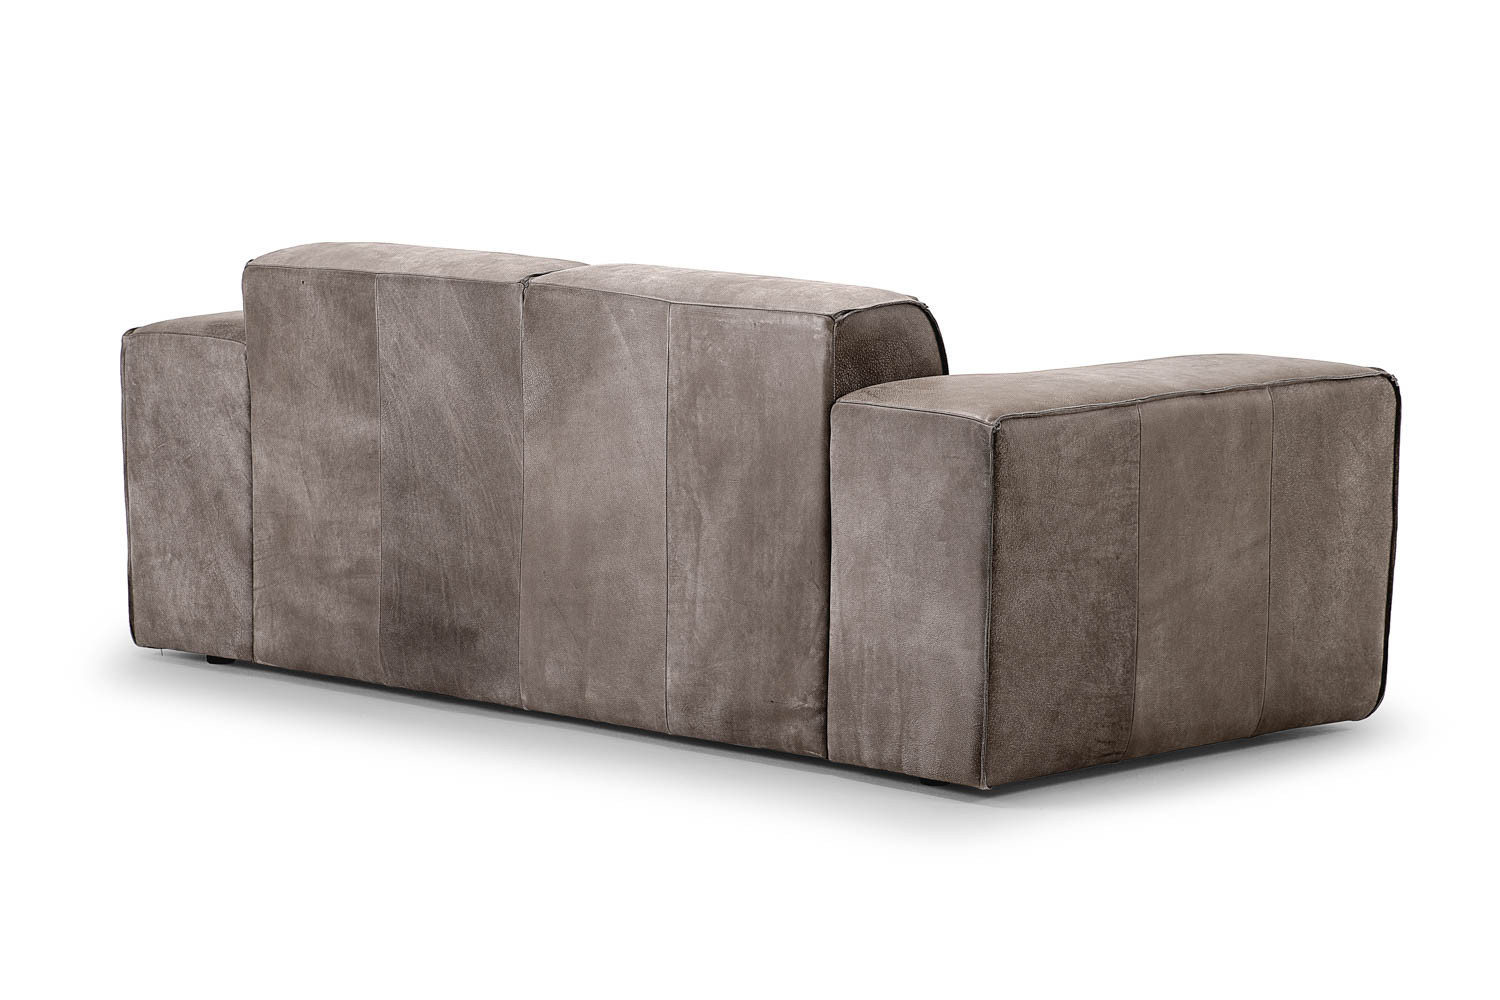 Jagger 2 Seater Leather Couch - Graphite